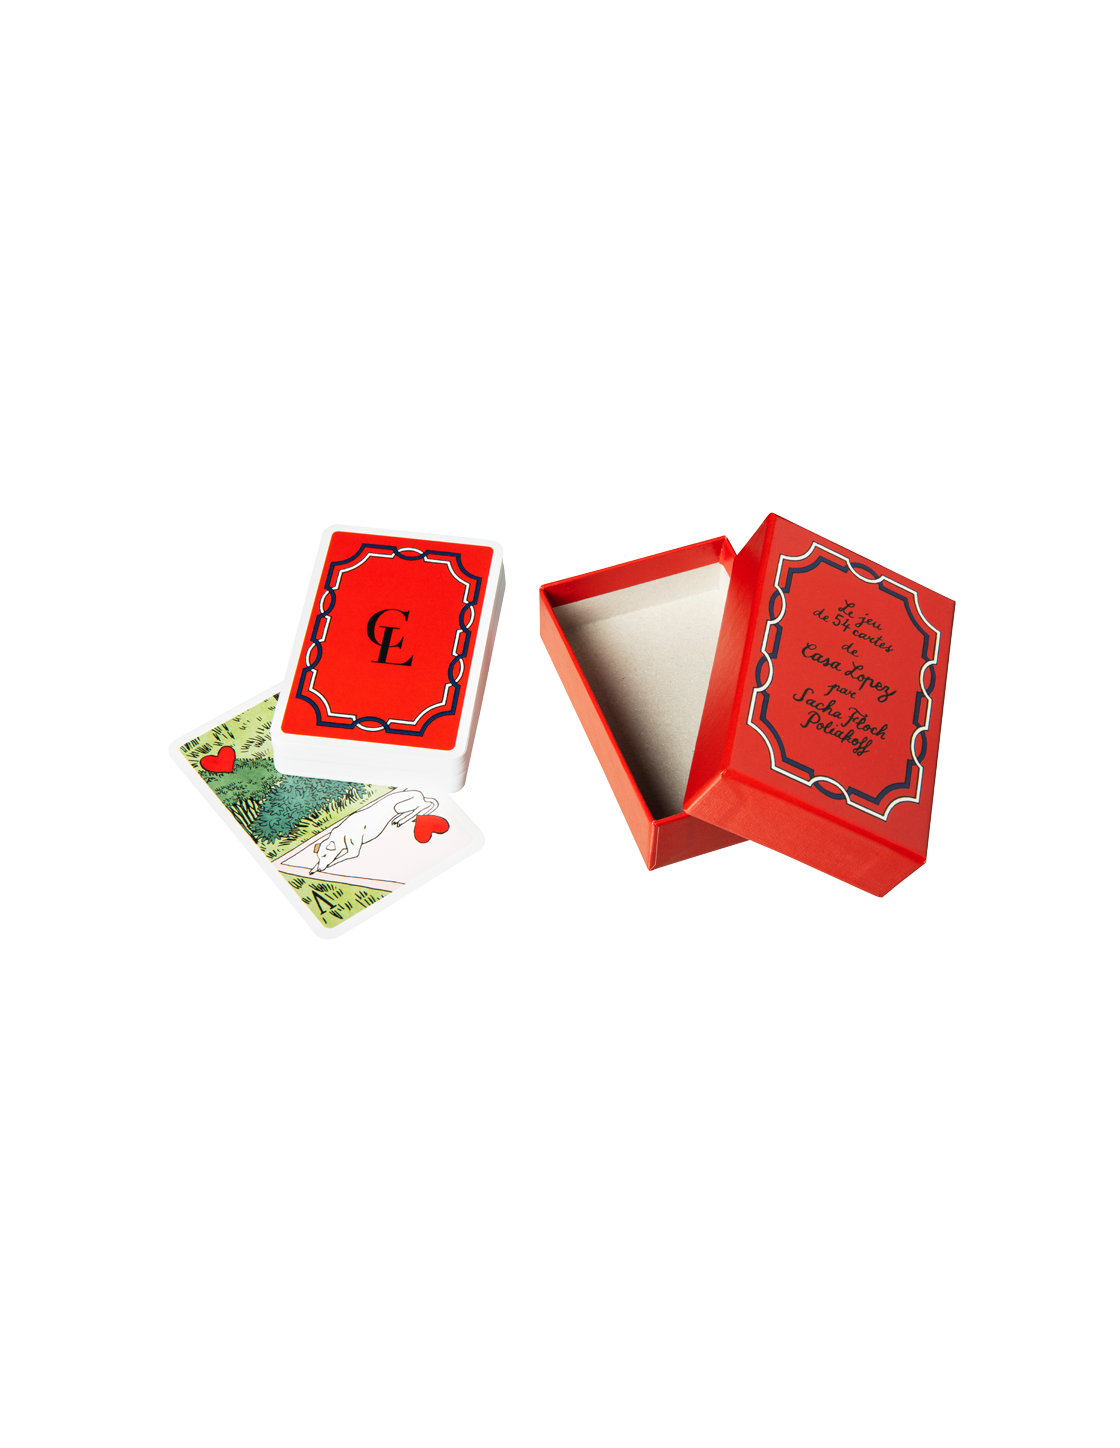 Illustrated Deck of Cards